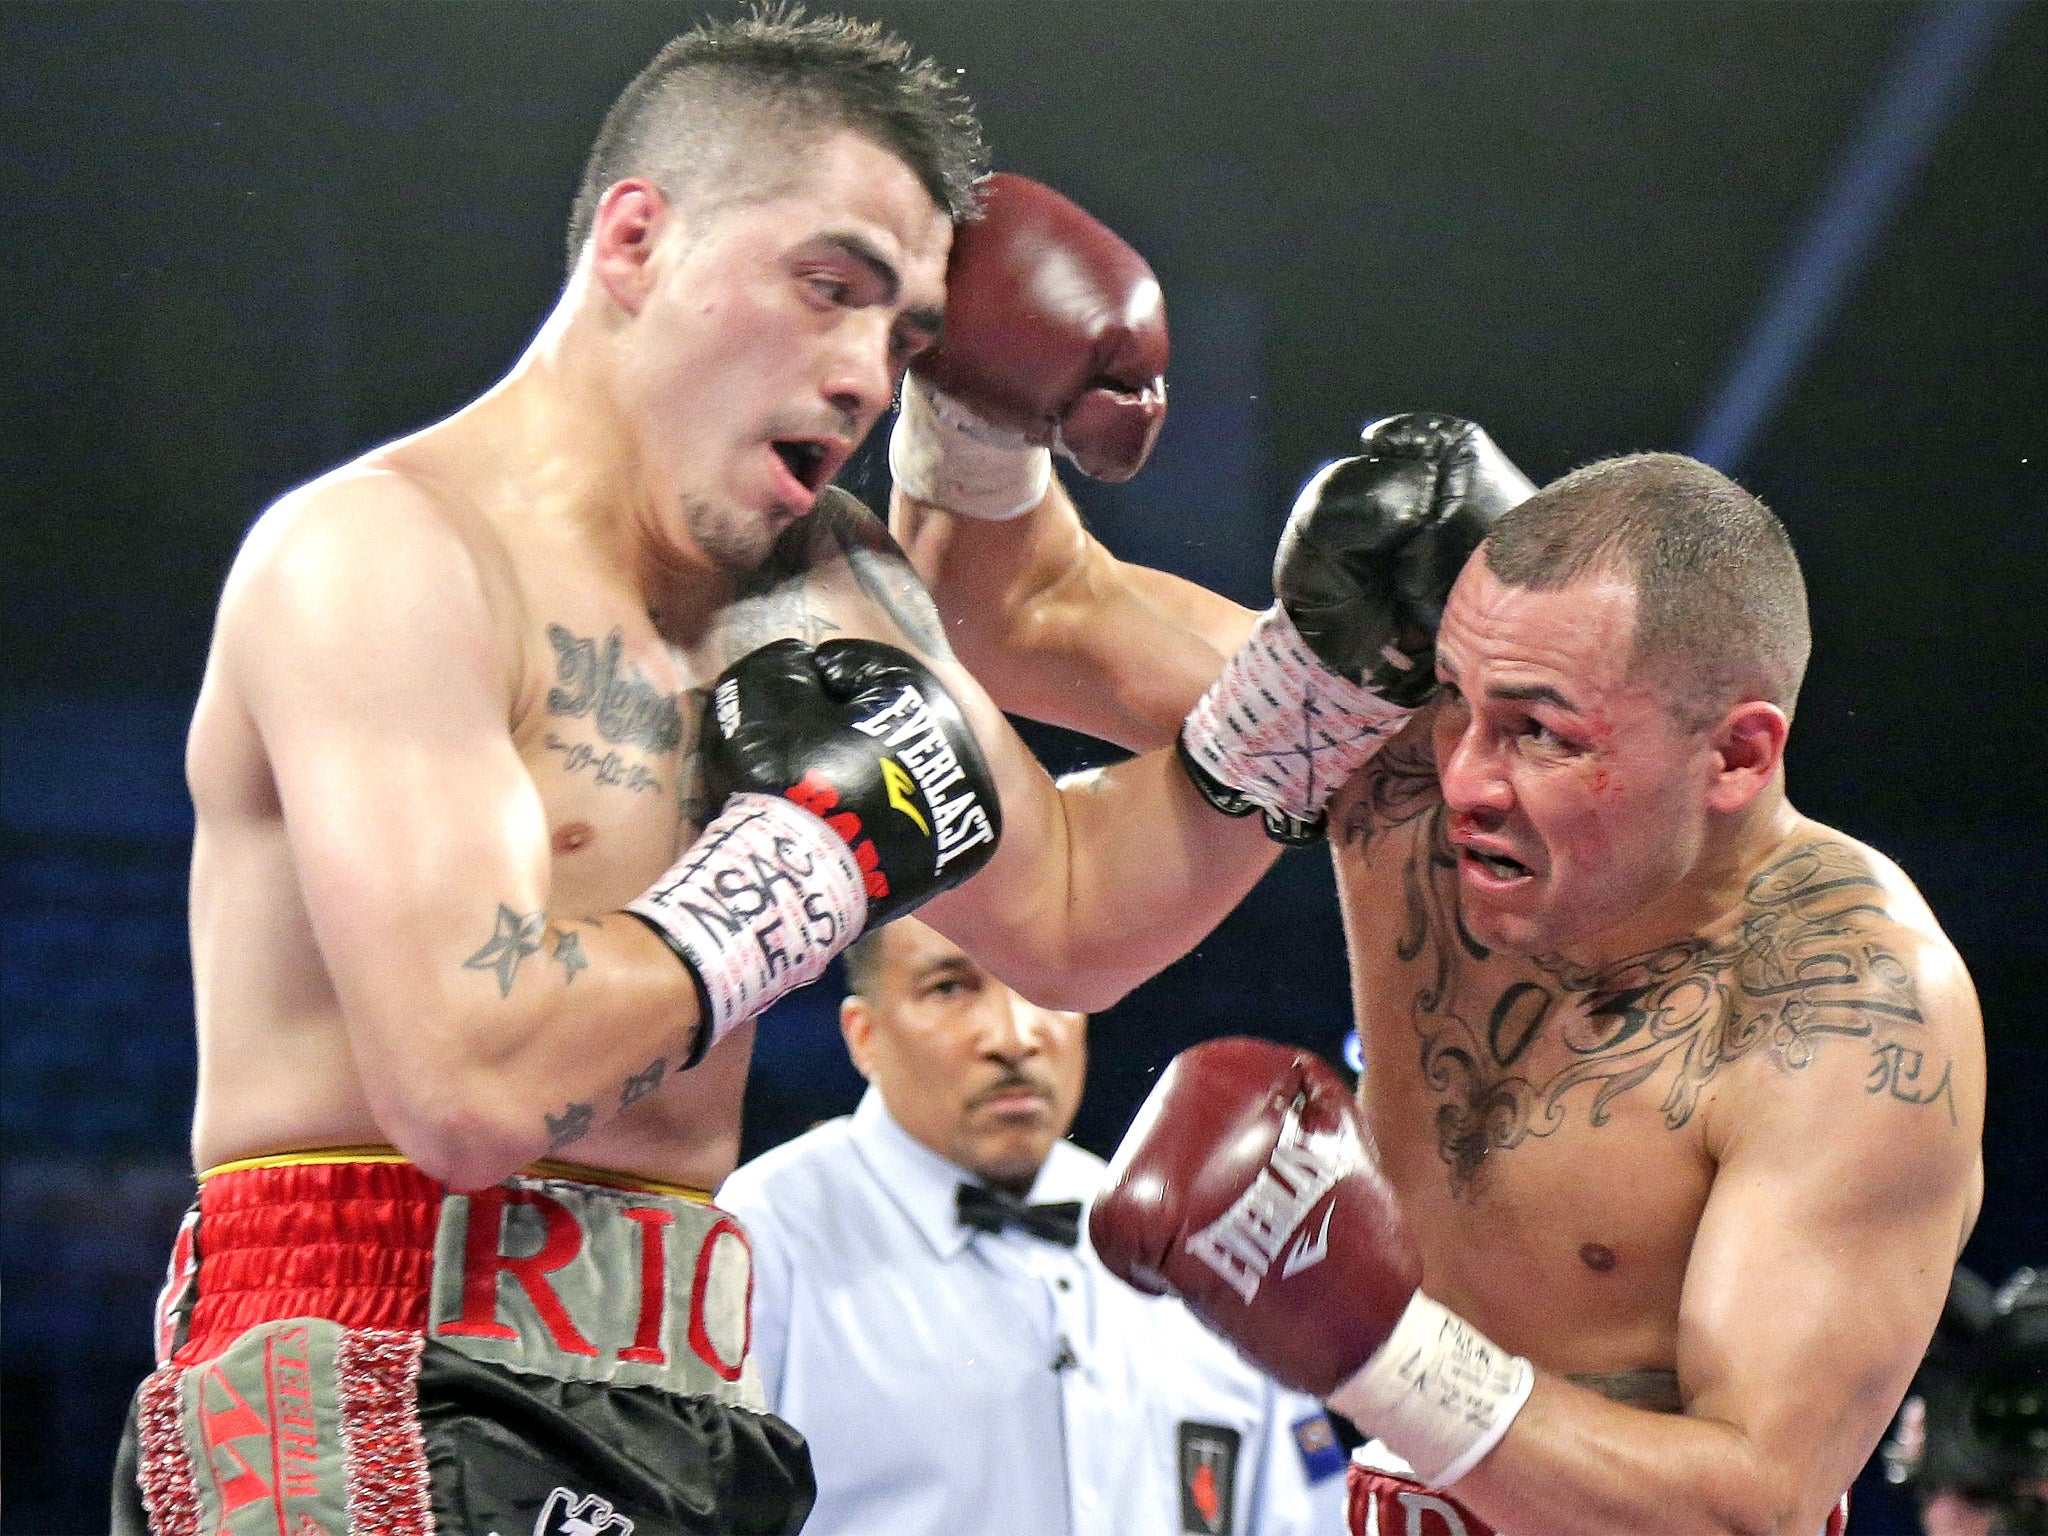 Mike Alvarado (right) exchanges punches with Brandon Rios during their ‘slugfest’ of a title fight in Las Vegas